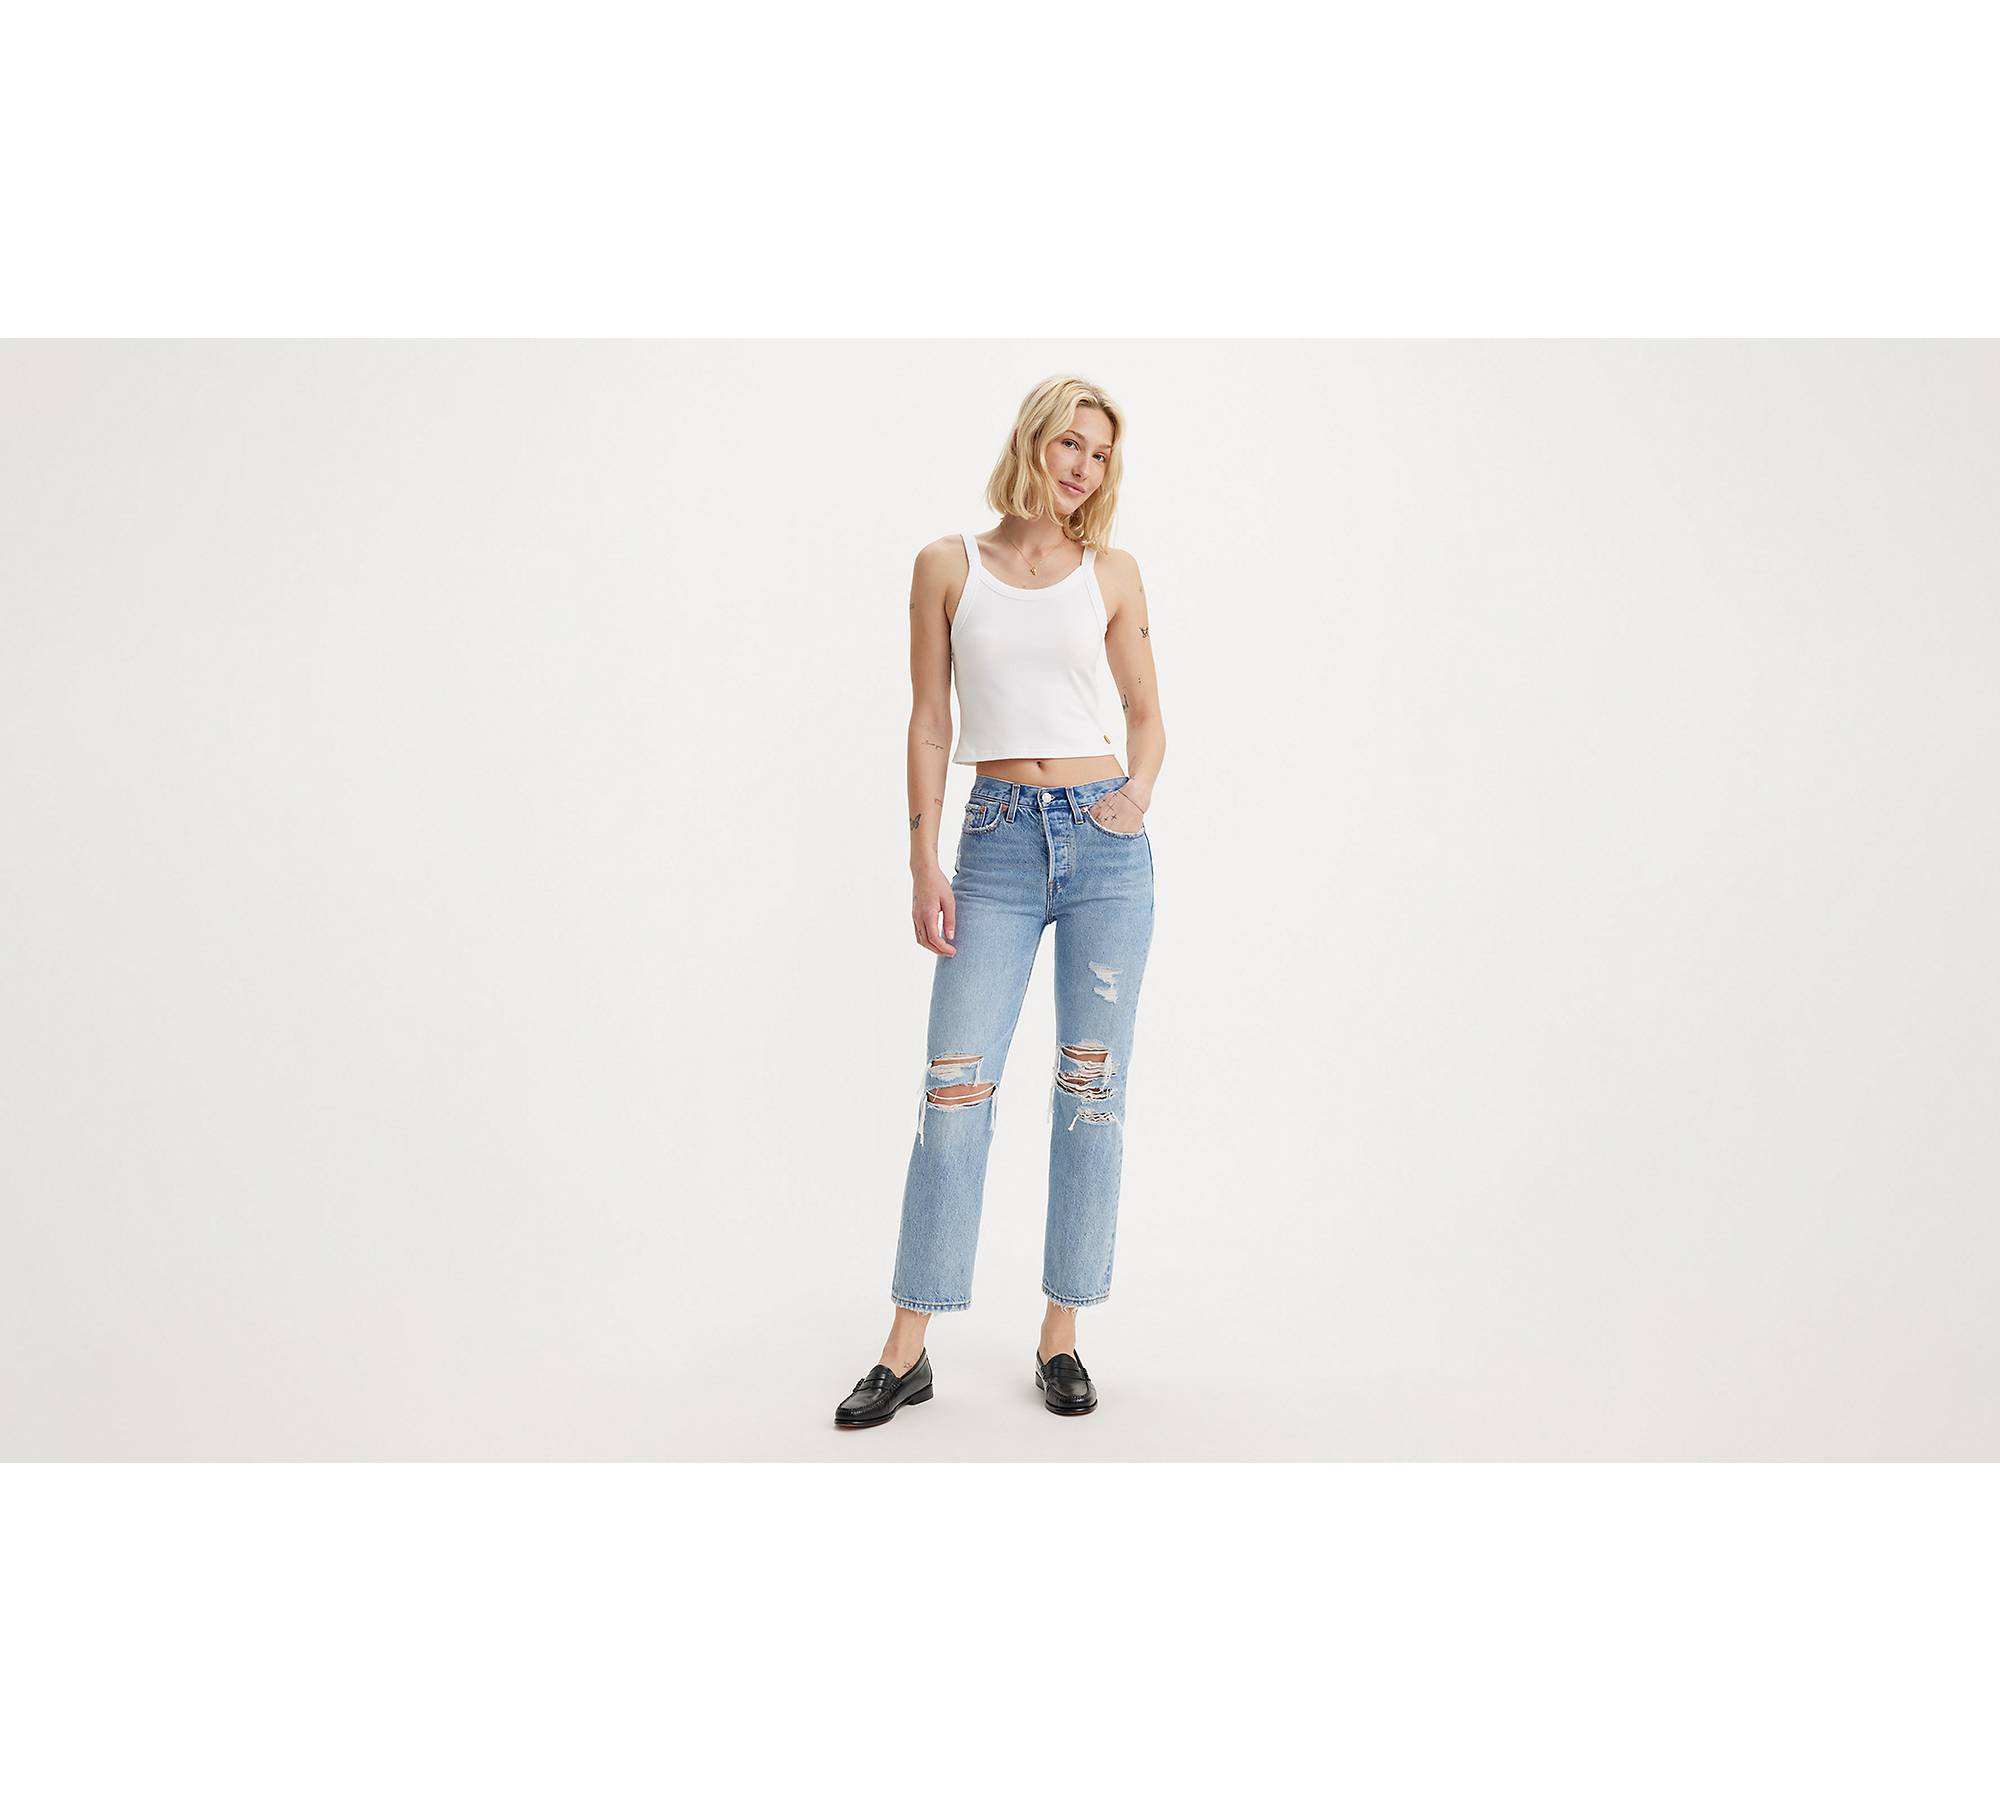 Ultra High-Rise Ripped Light Wash Dad Jeans